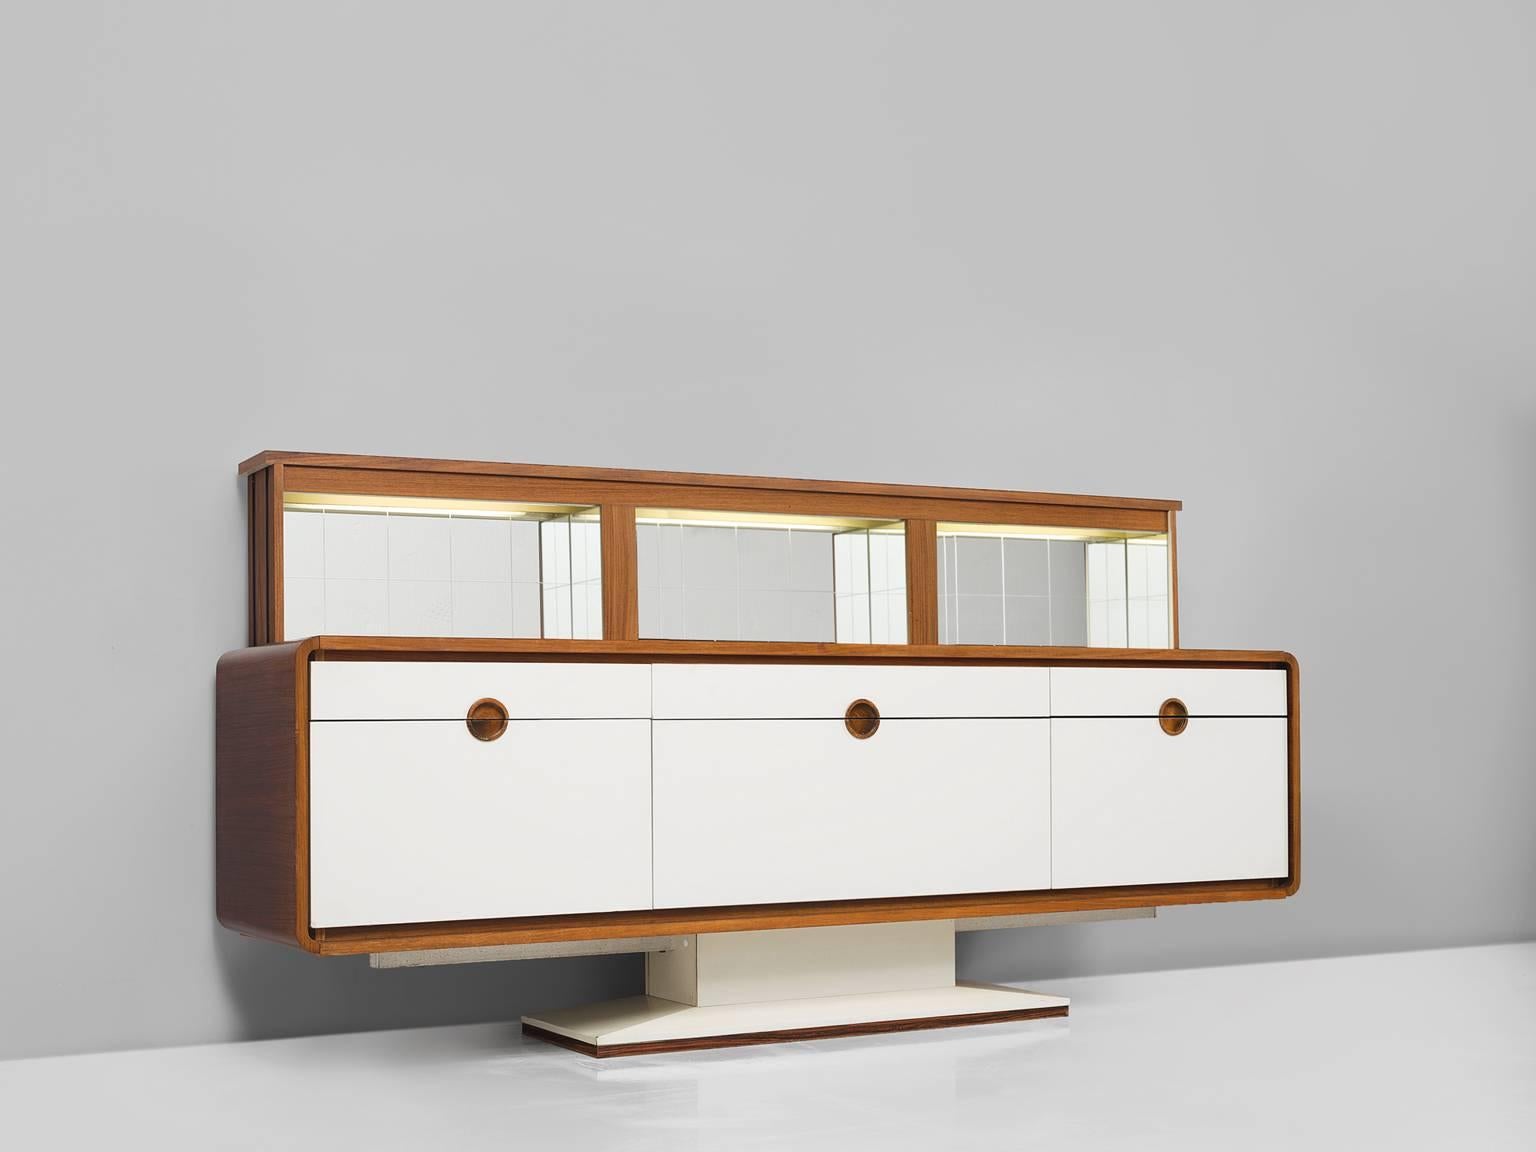 Credenza, wood, mirror, Europe, 1970s.

This piece has an Art Deco feel to it and is luxurious and well-executed. This cabinet is defined by a graphic play of a clean white planes and a warm neutral wood, giving this piece a refined finish. This